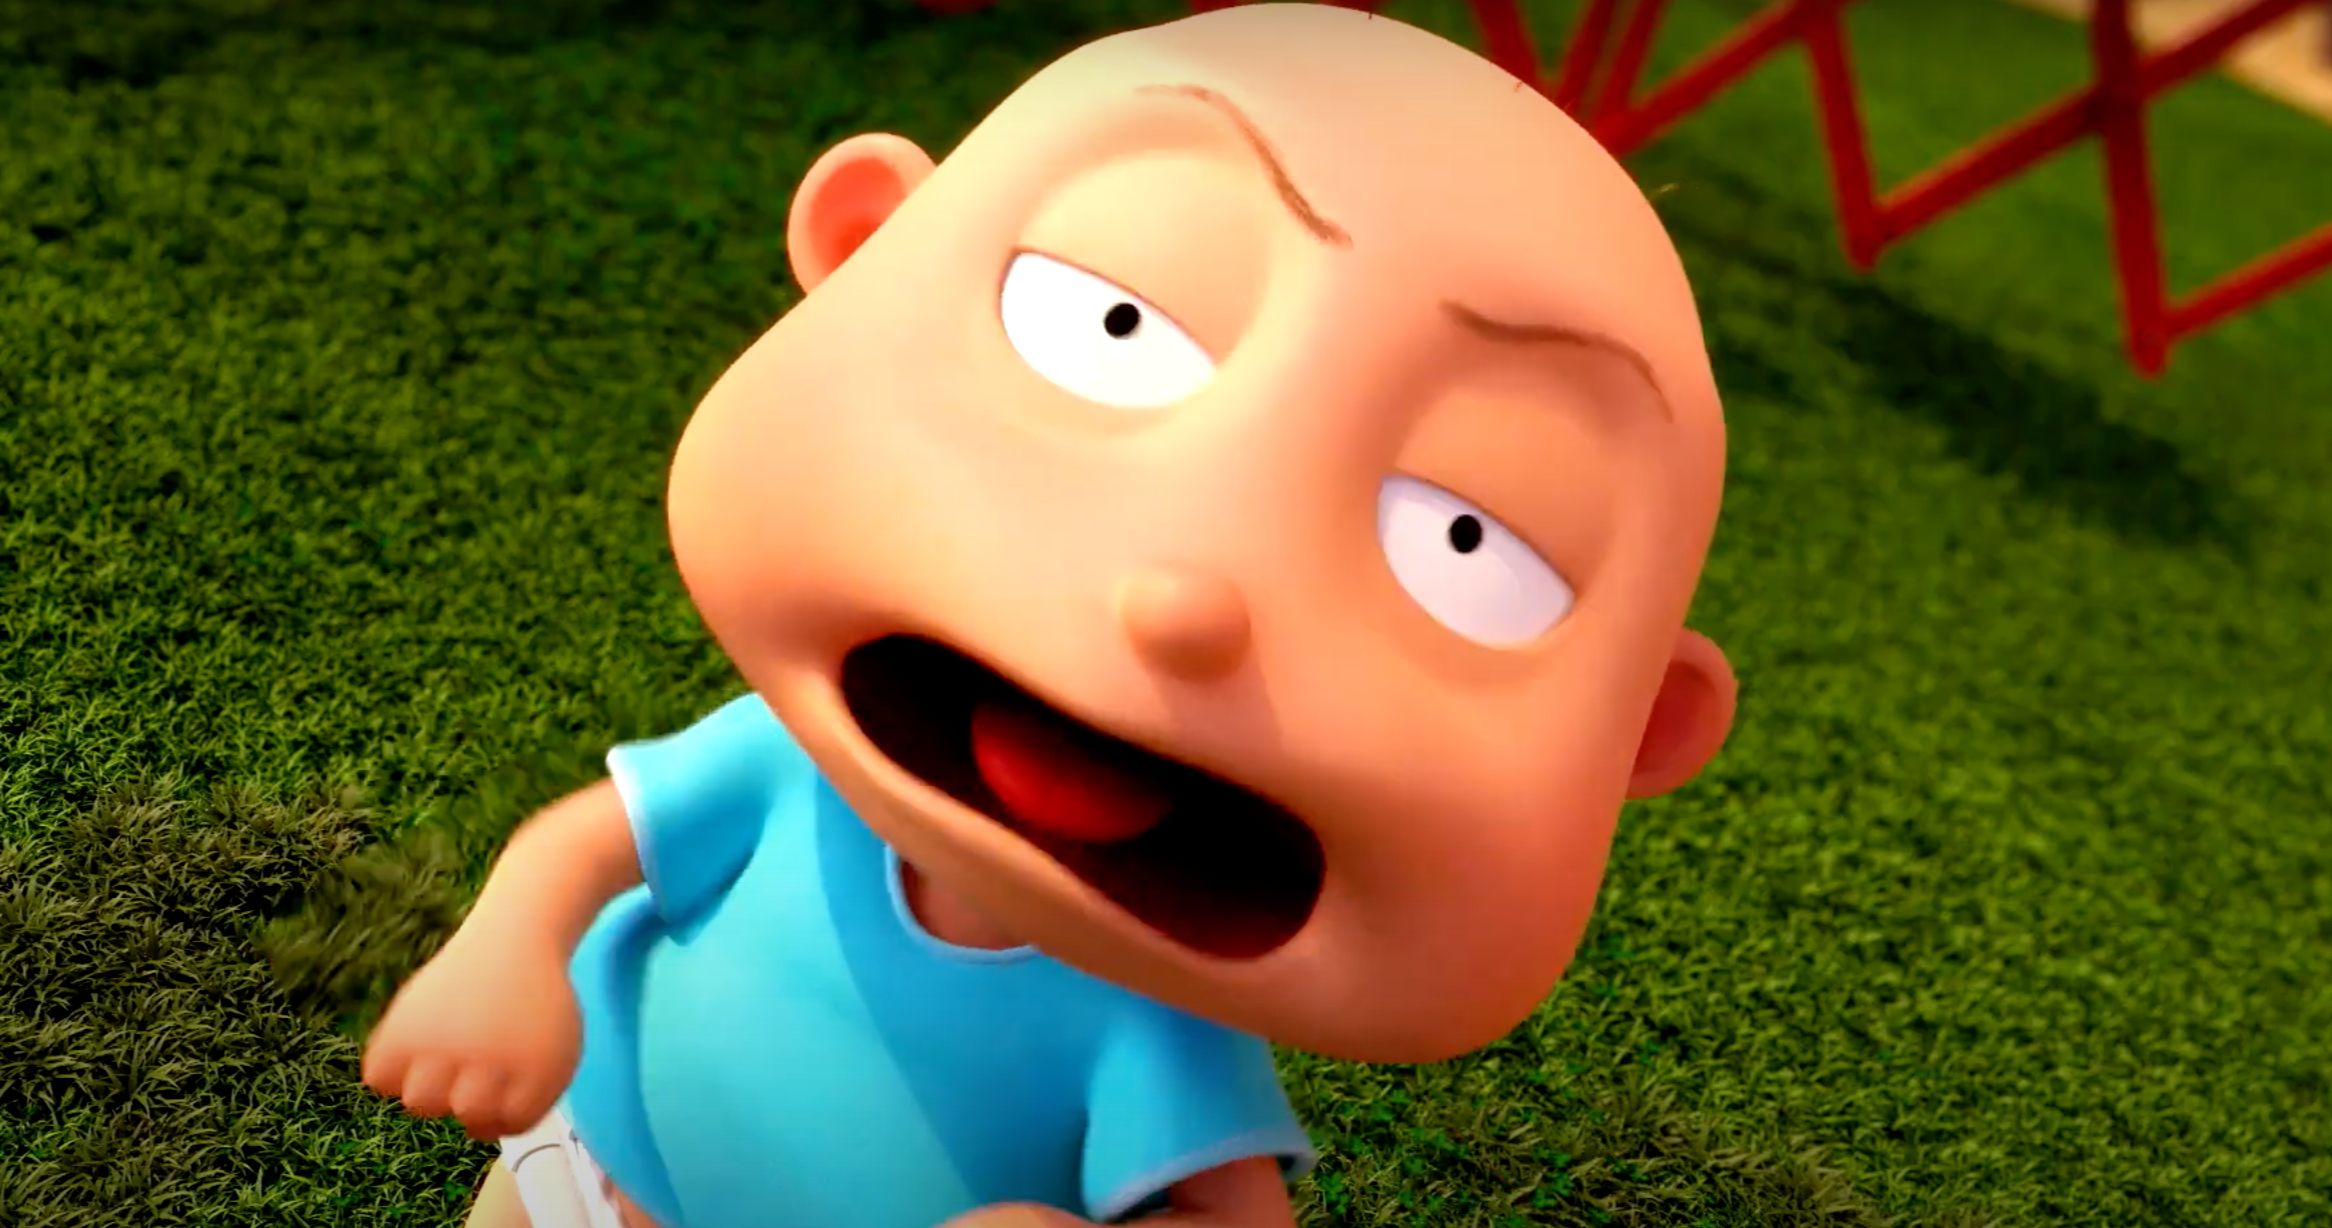 Rugrats Revival Gets an Early Summer Premiere on Paramount+